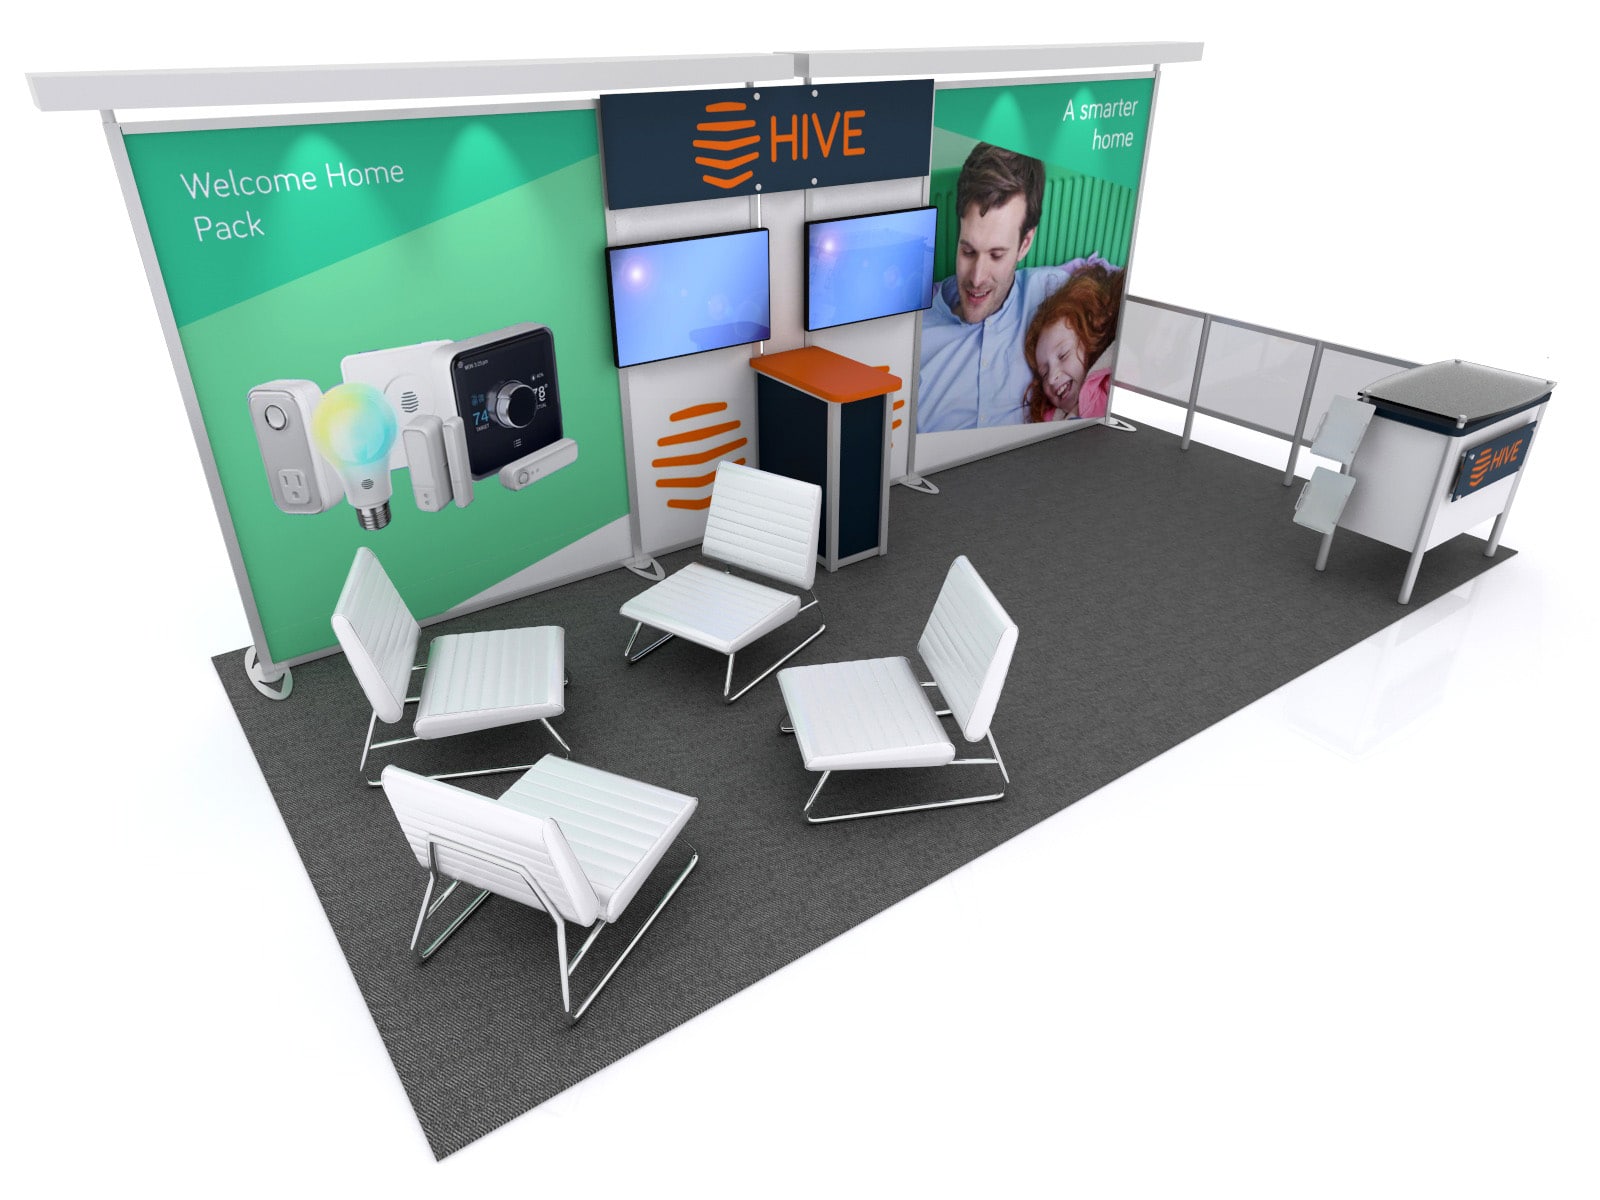 Custom 10x20 with Trade Show Furniture Shown - DM VK-2068